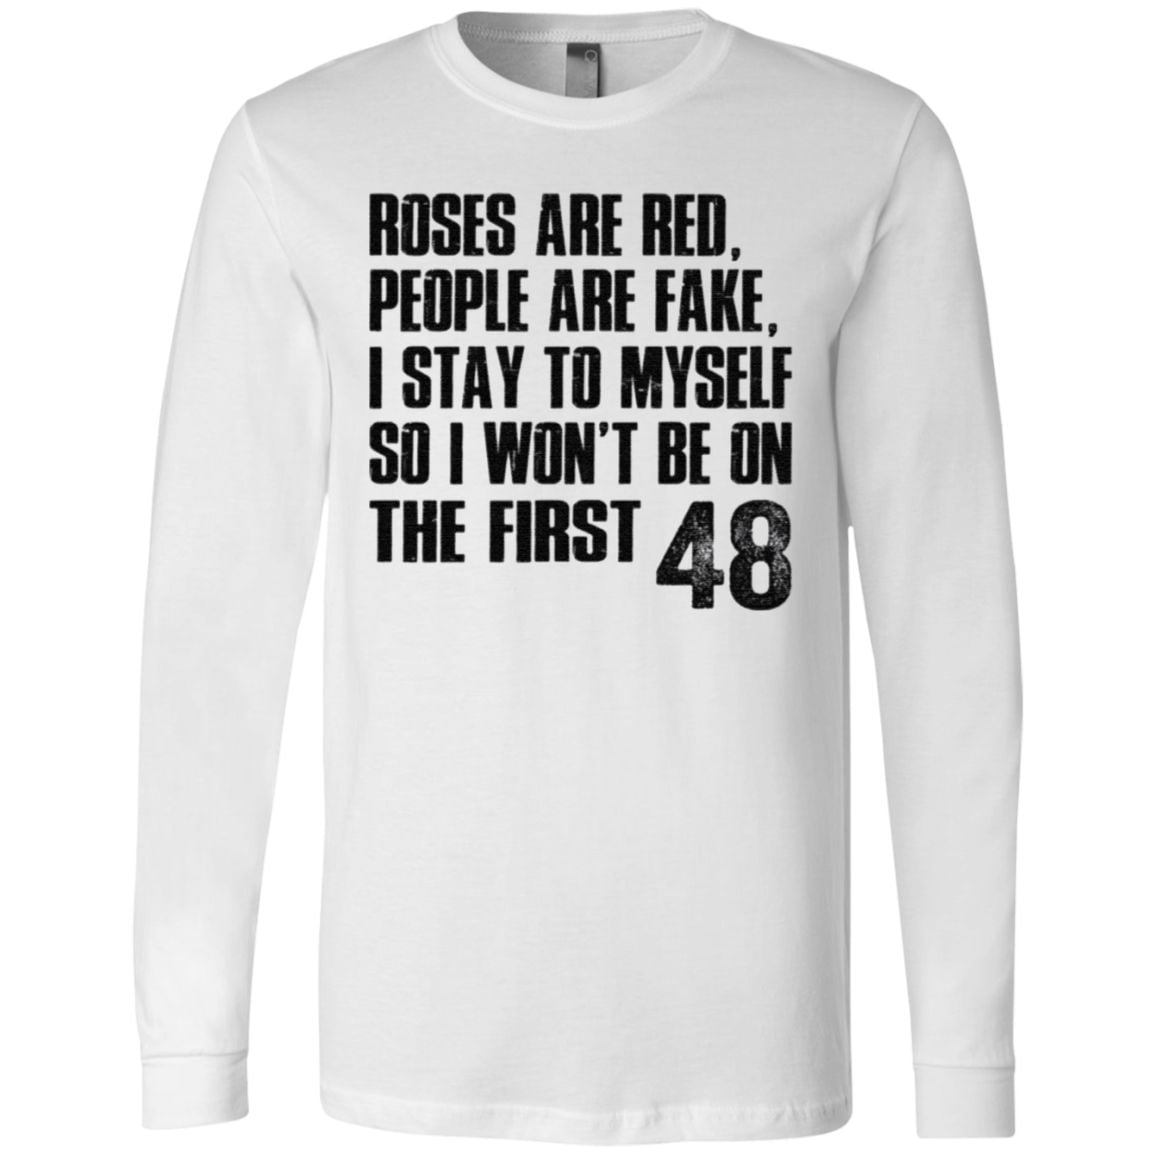 Roses Are Red, People Are Fake, I Stay To Myself So I Won’t Be On The First 48 T Shirt